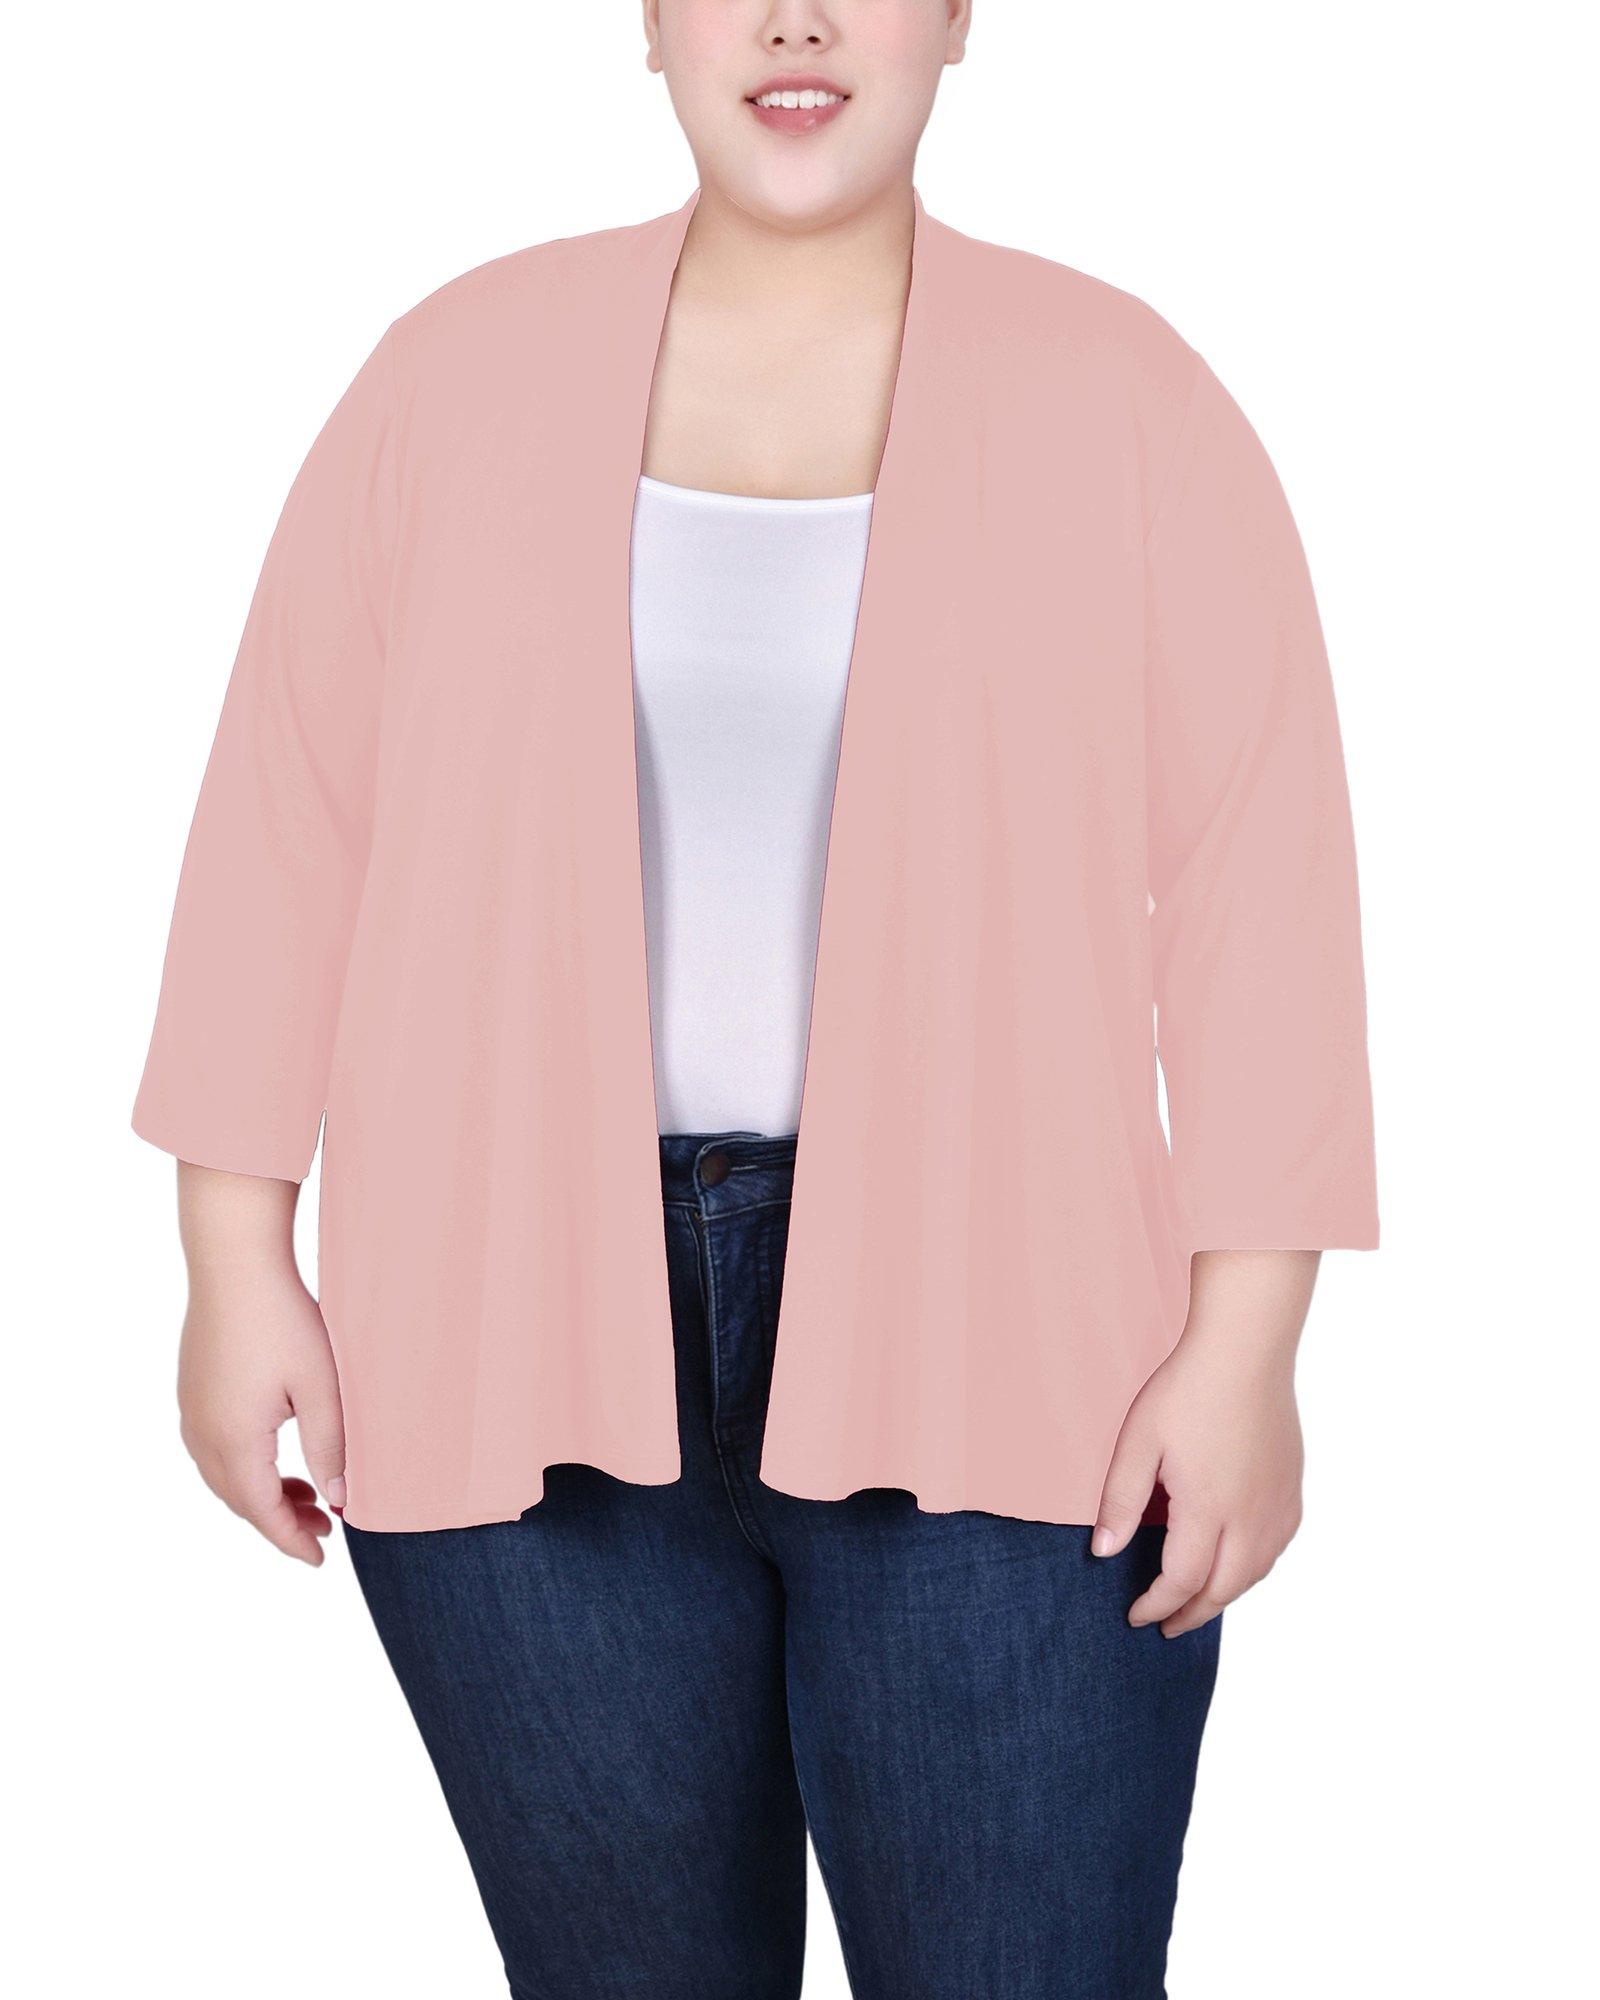 Womens Plus Size Solid 3/4 Sleeve Cardigan